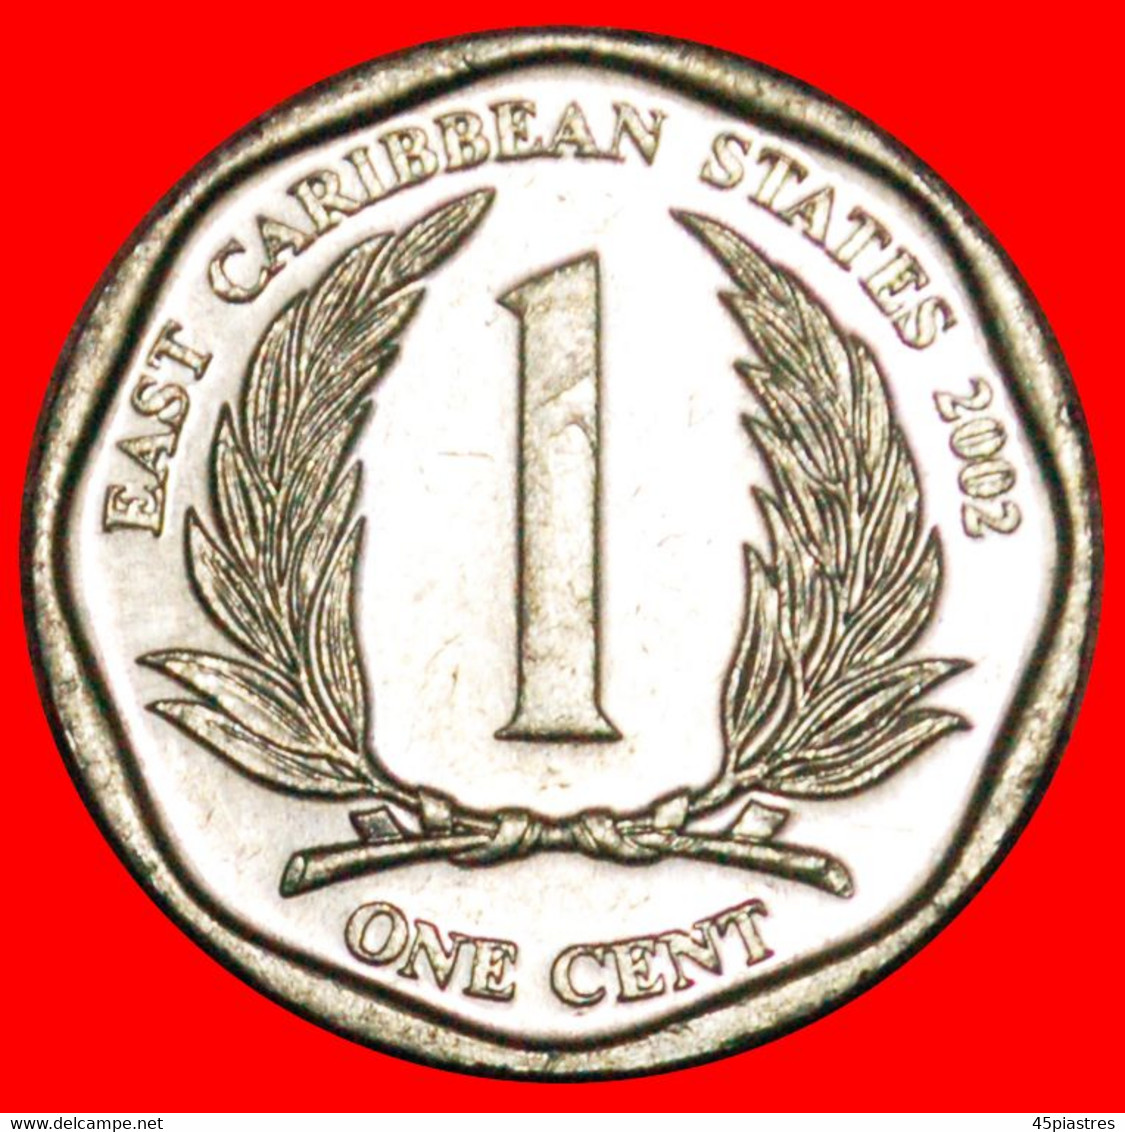 * ROUND (2002-2013): EAST CARIBBEAN STATES ★ 1 CENT 2002 DISCOVERY COIN! MINT LUSTRE!★LOW START ★ NO RESERVE! - Caraibi Orientali (Stati Dei)